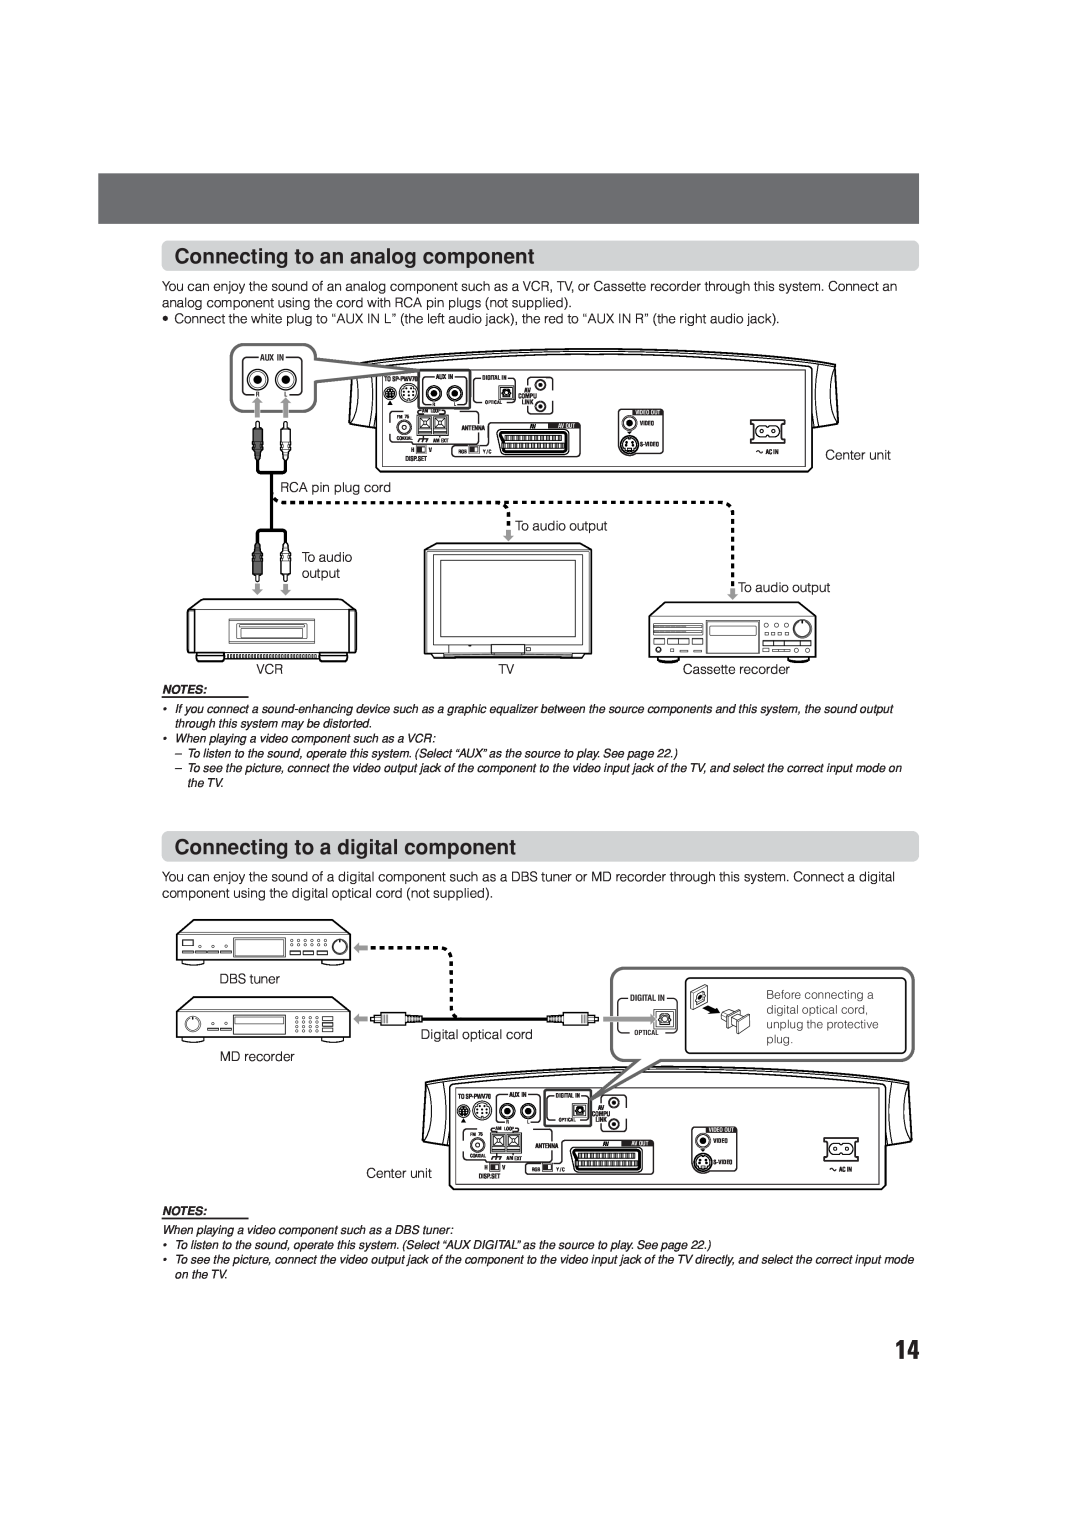 JVC LVT0865-004A, XV-THV70R, SP-XCV70 manual Connecting to an analog component, Connecting to a digital component 